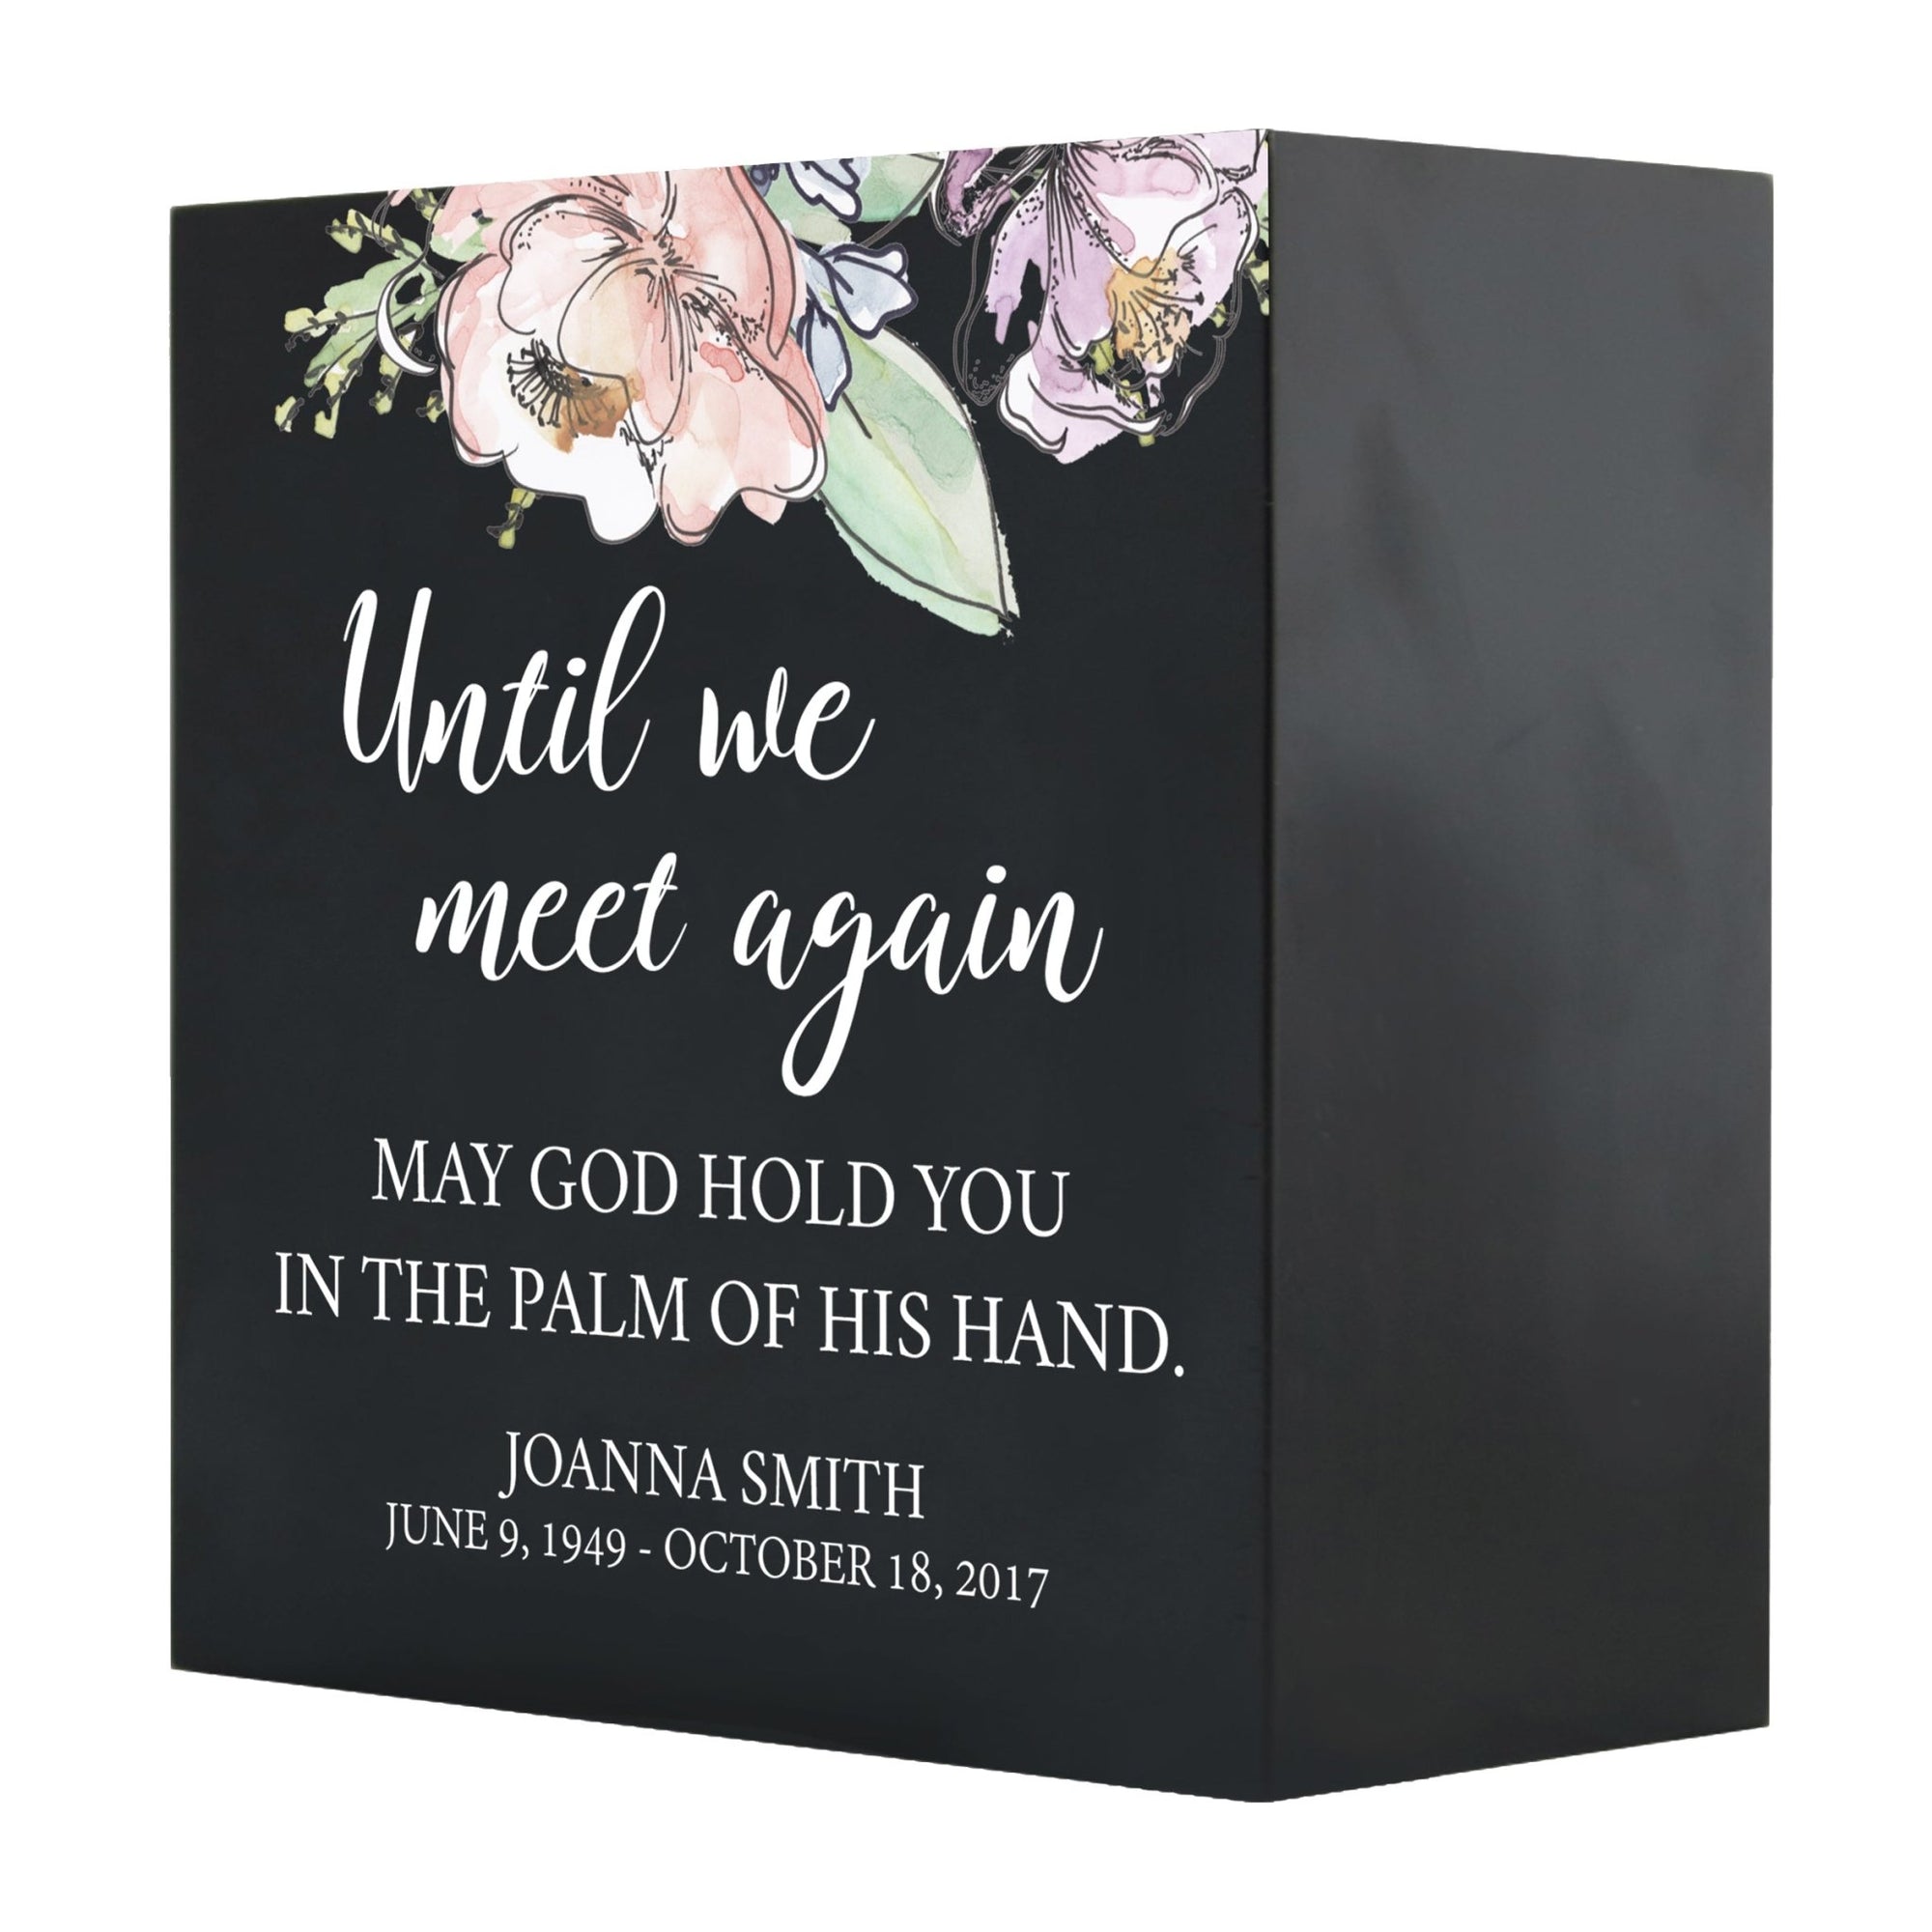 Personalized Modern Inspirational Memorial Wooden Shadow Box and Urn 6x6 holds 53 cu in of Human Ashes - Until We Meet Again (Palm) - LifeSong Milestones